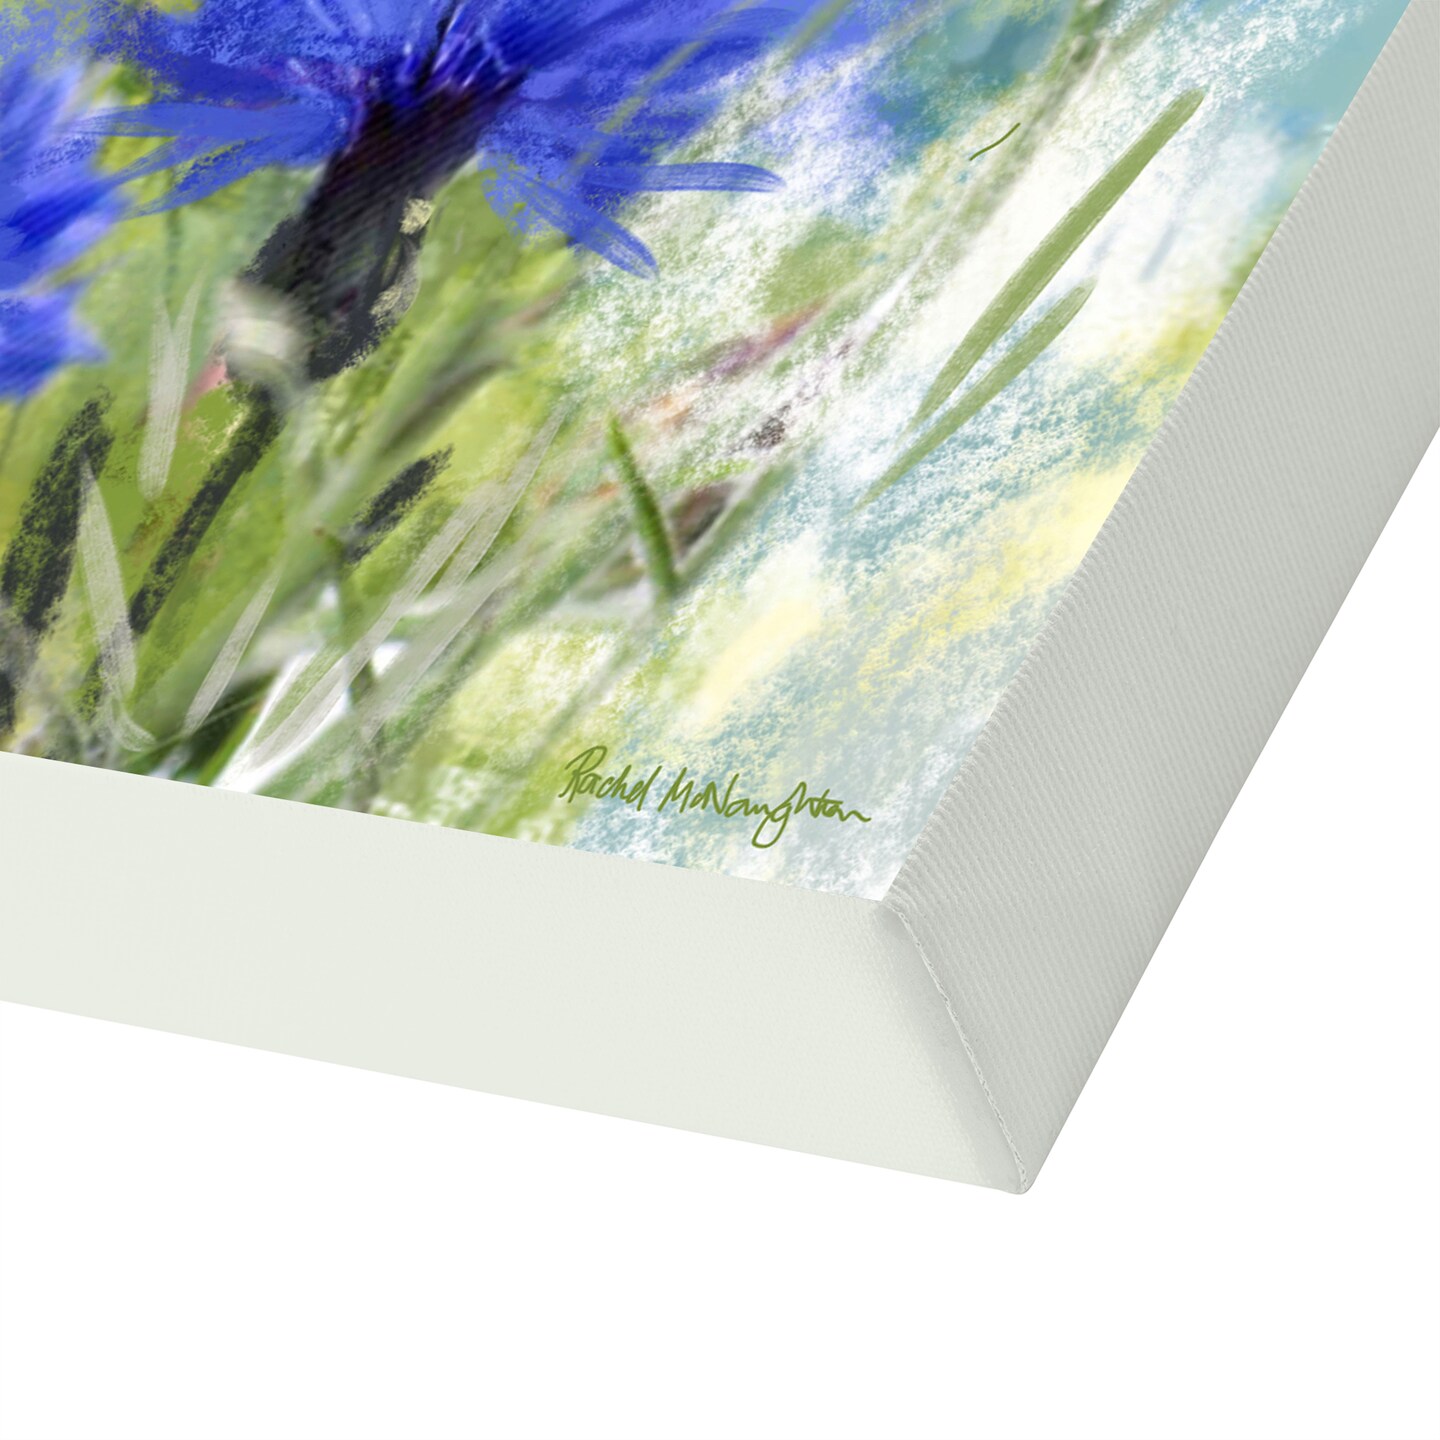 Cornflowers by Rachel McNaughton 10x10 Gallery Wrapped Canvas - Americanflat